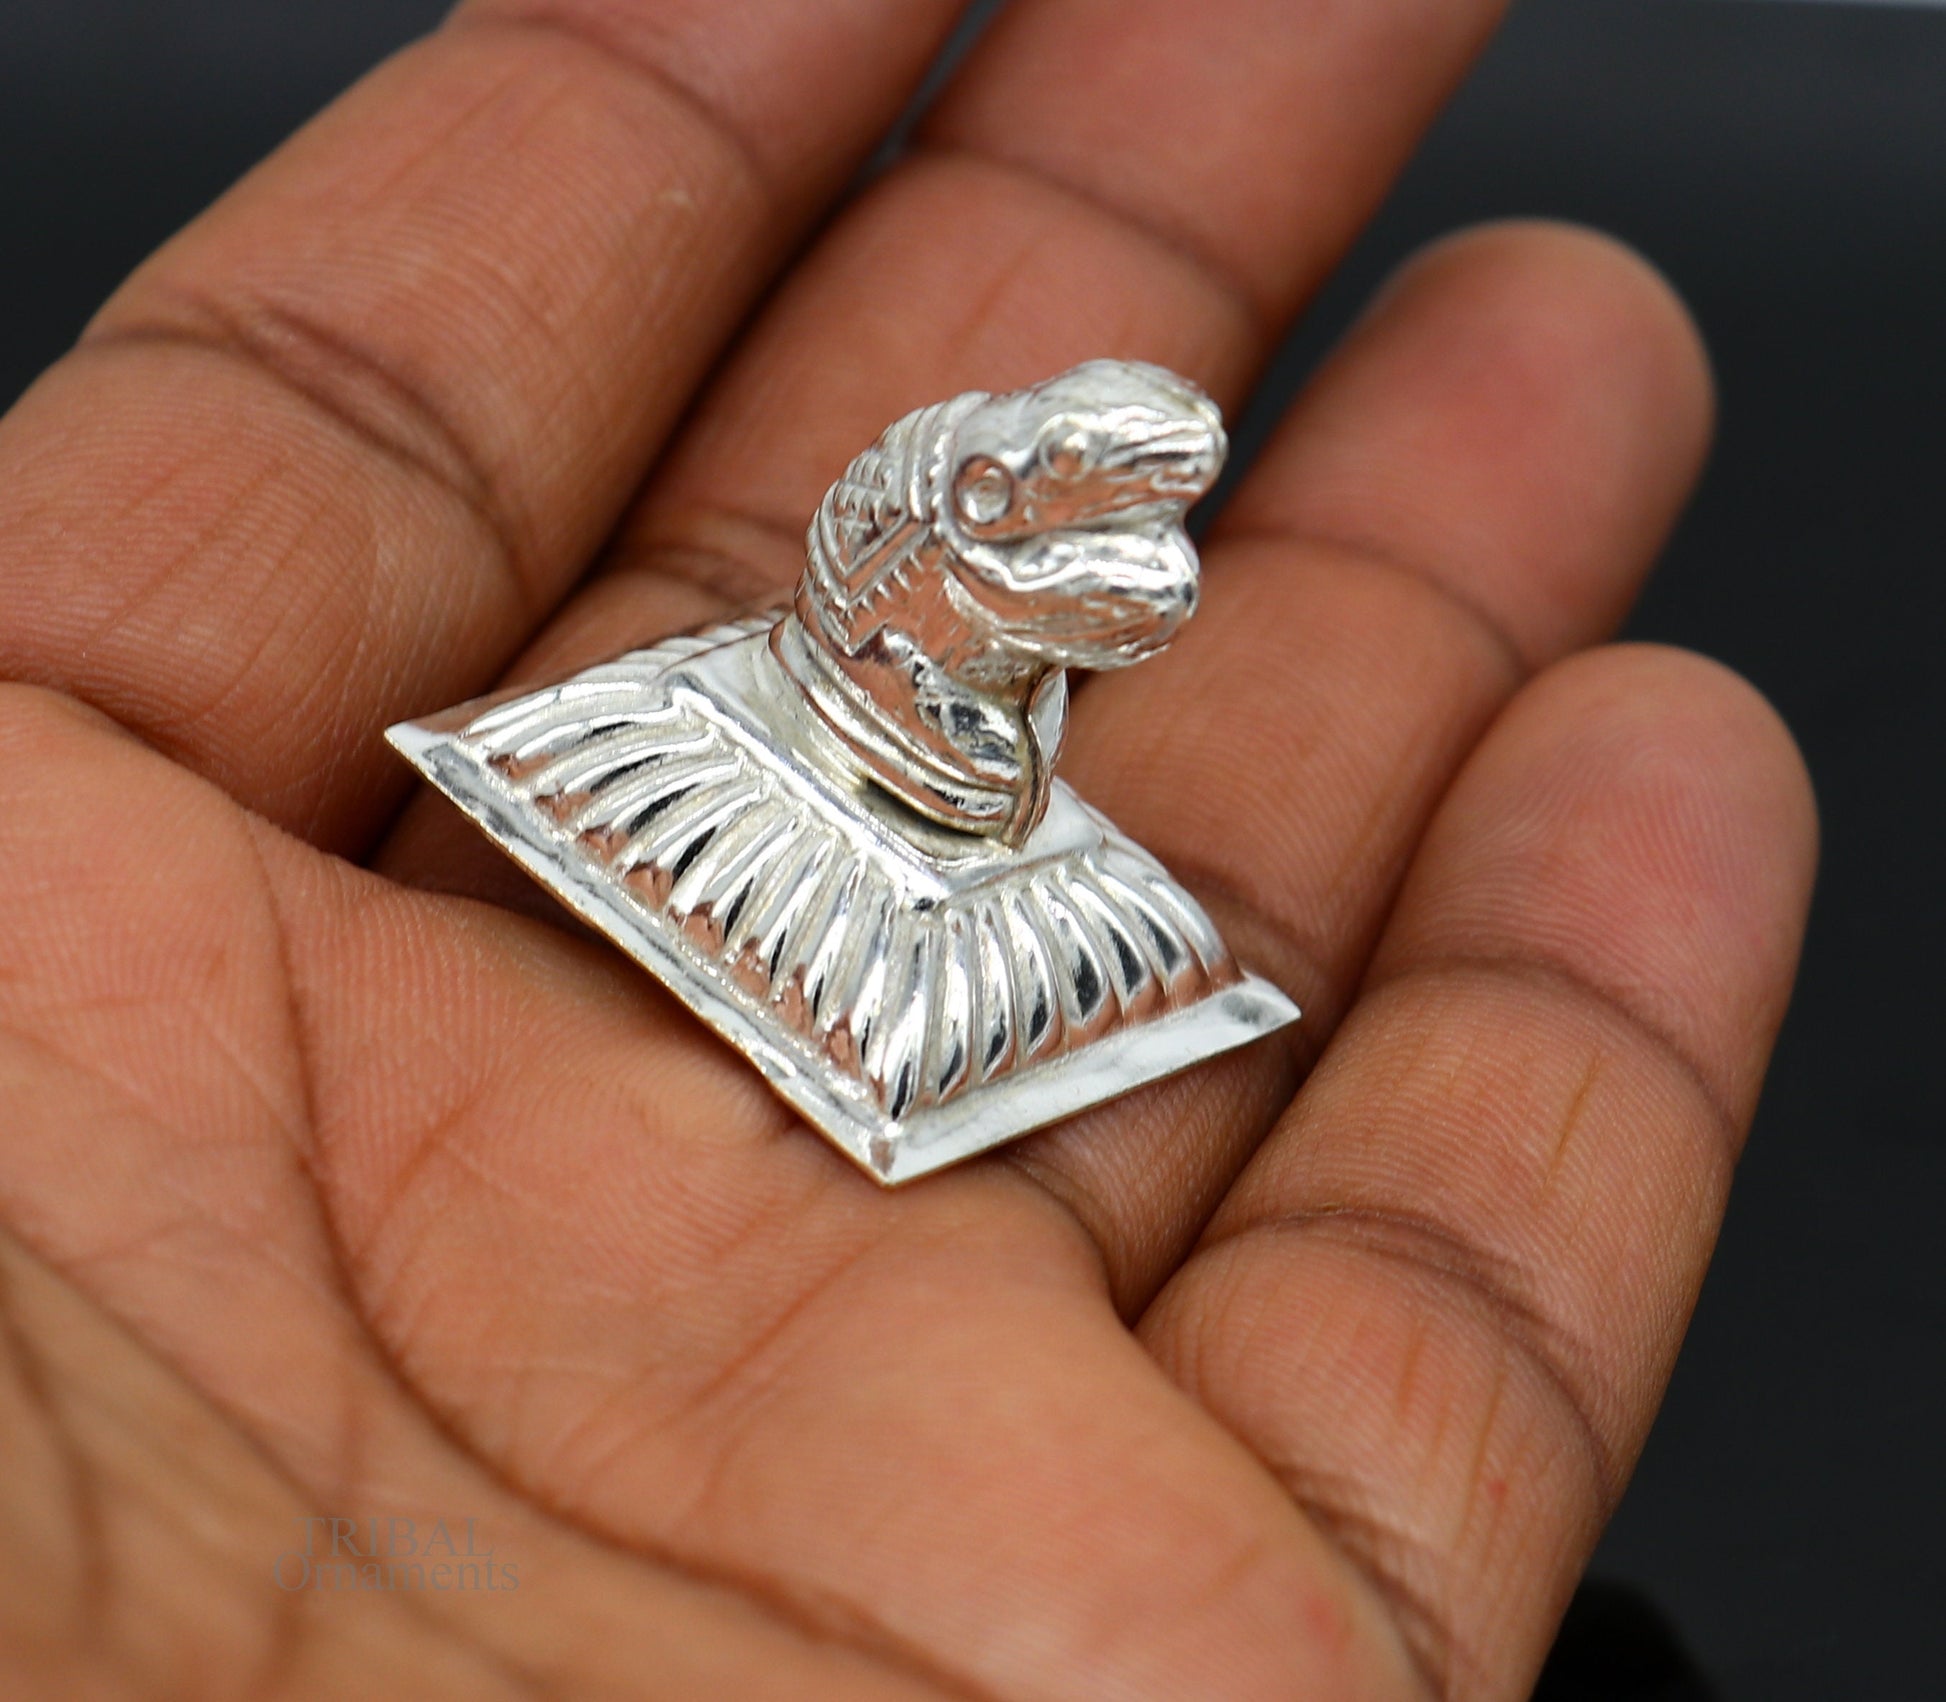 Lord Ganesha Vahan Mushak  maharaj sterling silver handmade small article for puja, best gift for lord ganesha, divine statue su609 - TRIBAL ORNAMENTS